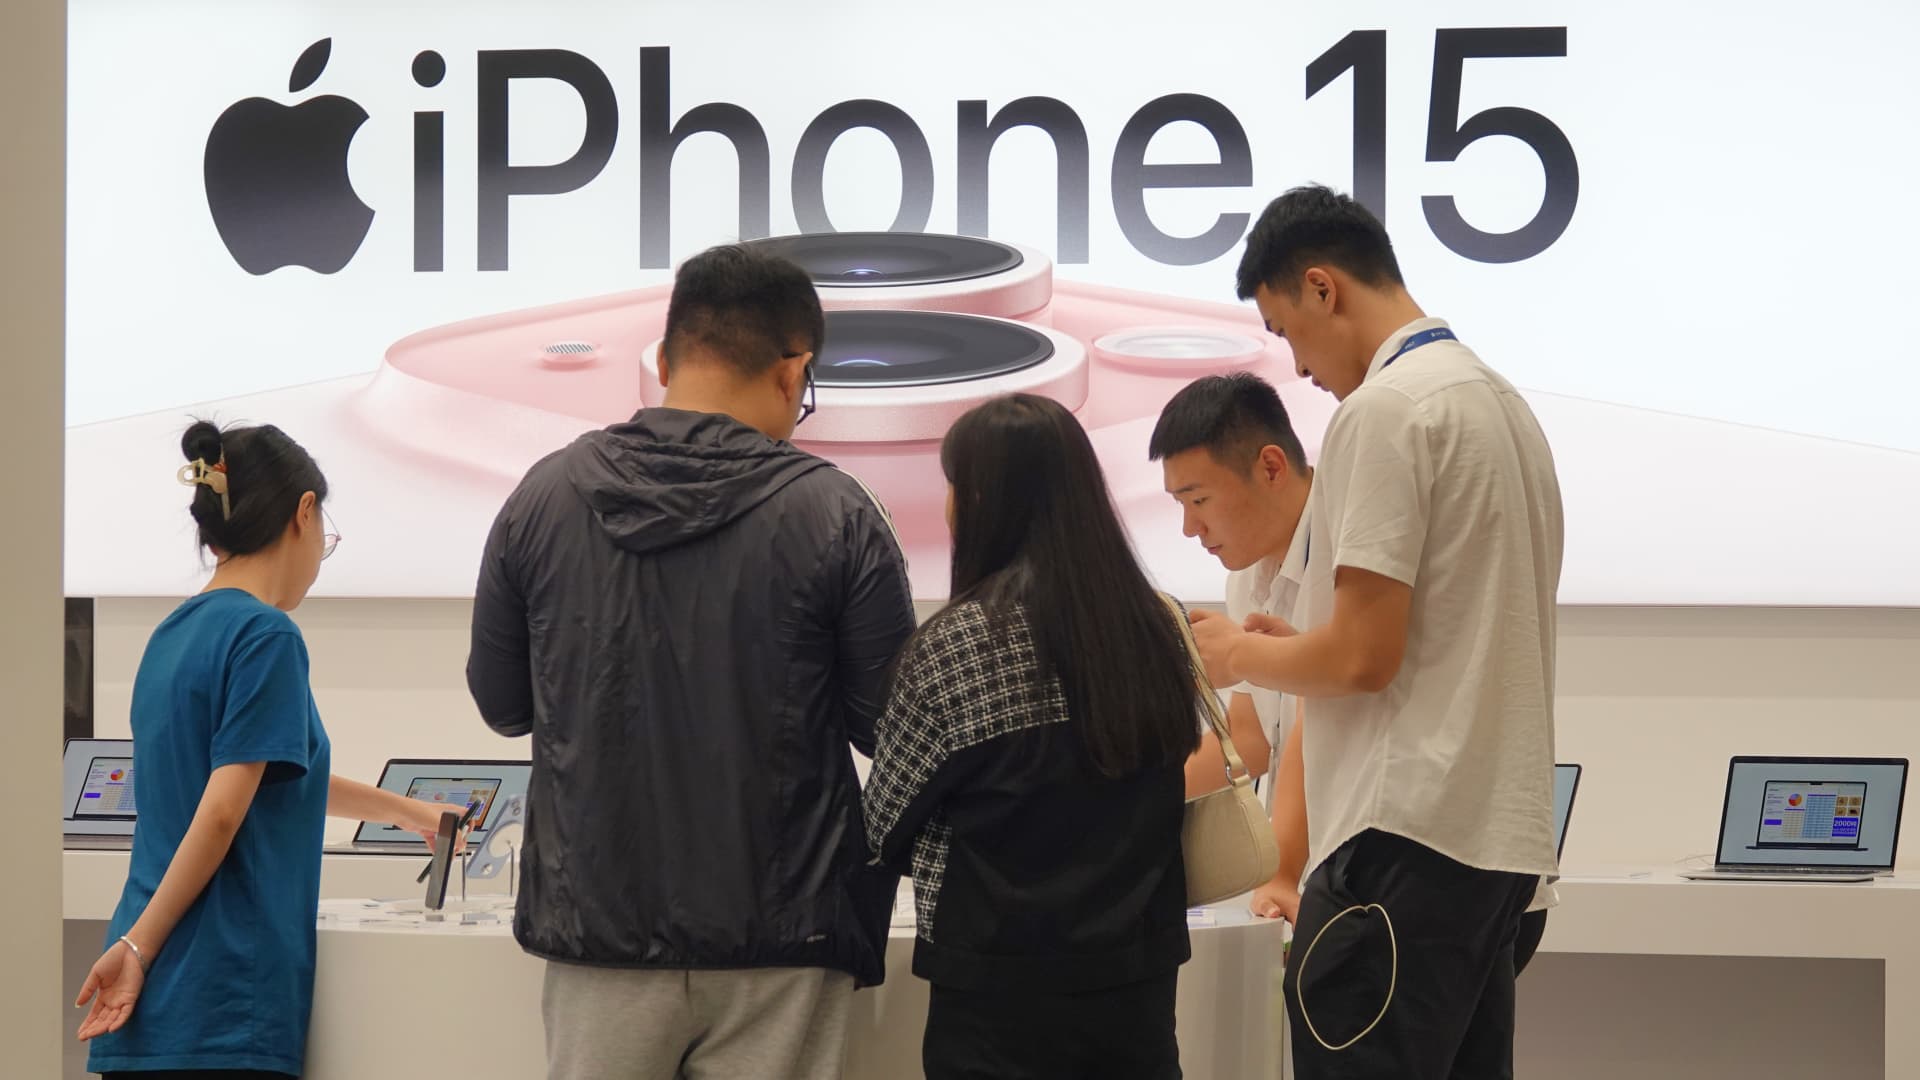 Apple iPhone sales plunge 24% in China as Huawei smartphone business resurges, report says